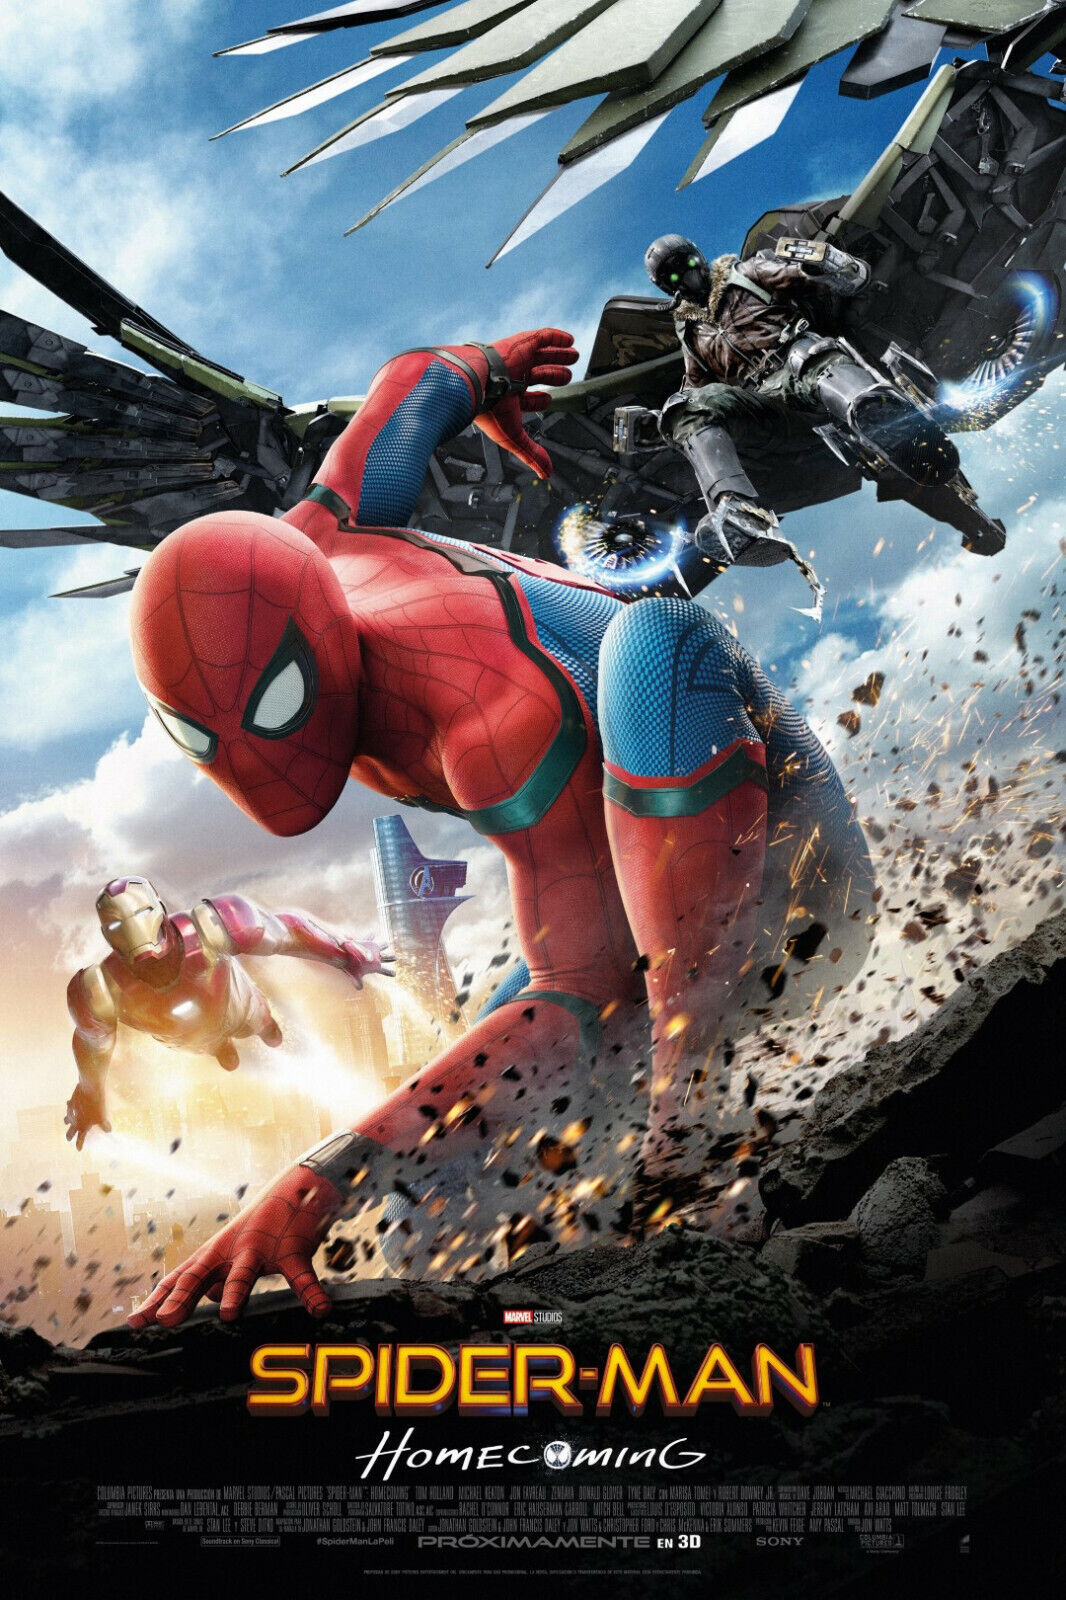 Spiderman movie poster with other two super heroes beside